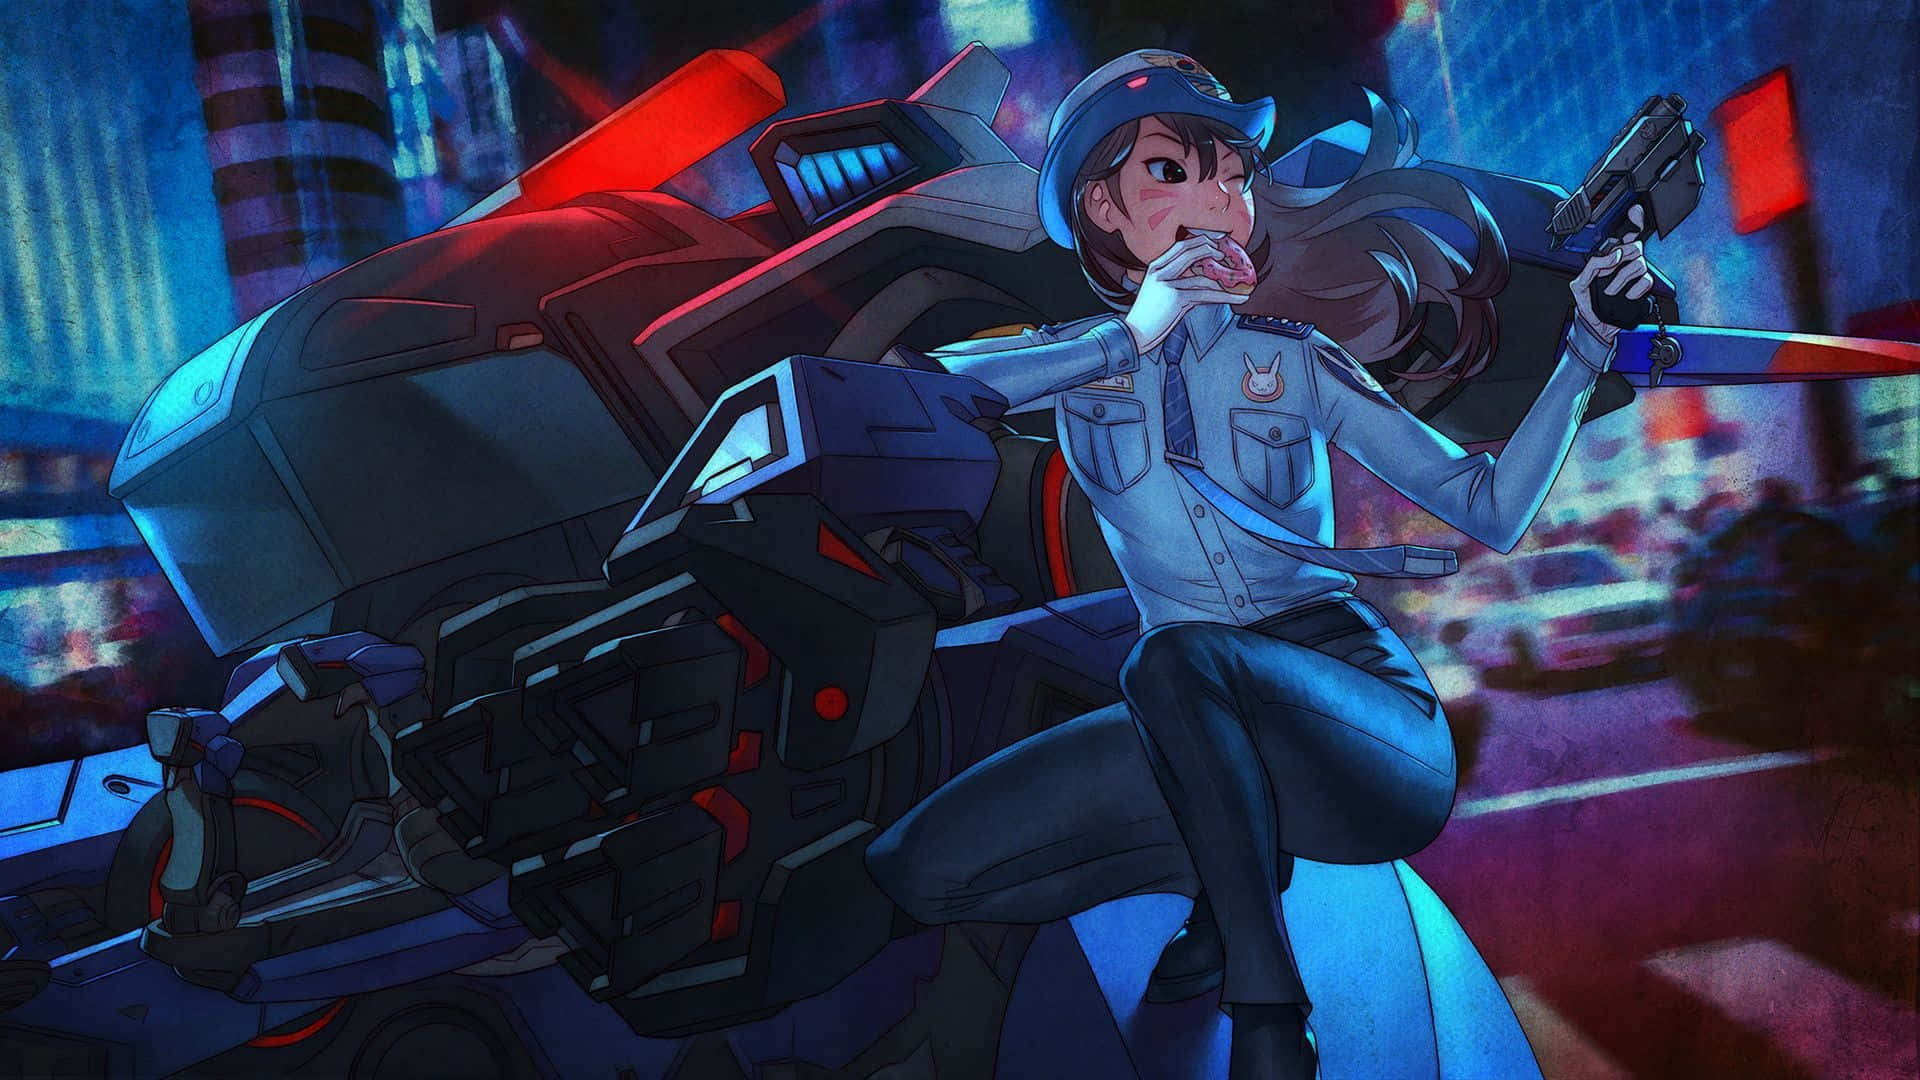 Take on the world with Dva from Overwatch Wallpaper